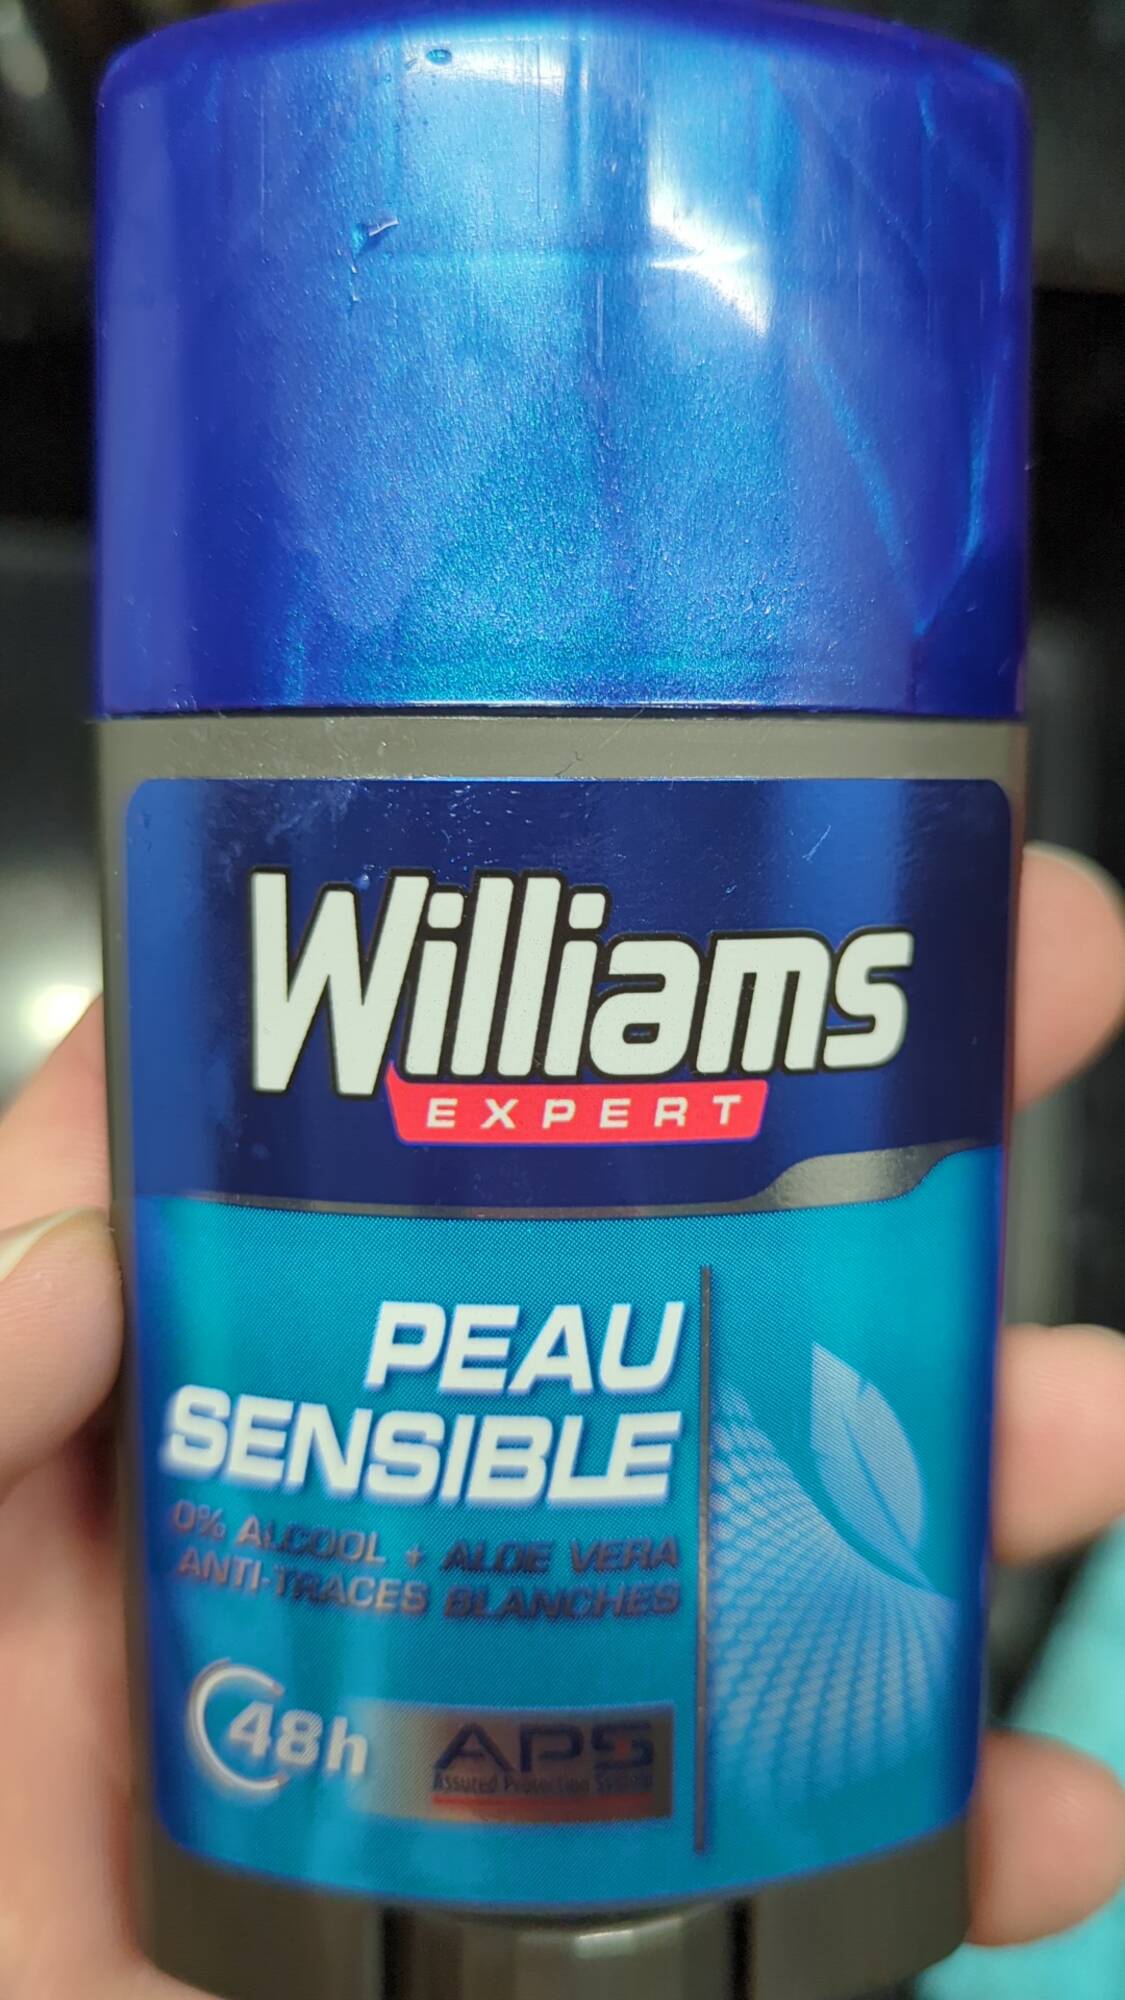 WILLIAMS EXPERT - Anti-traces blanches peau sensible